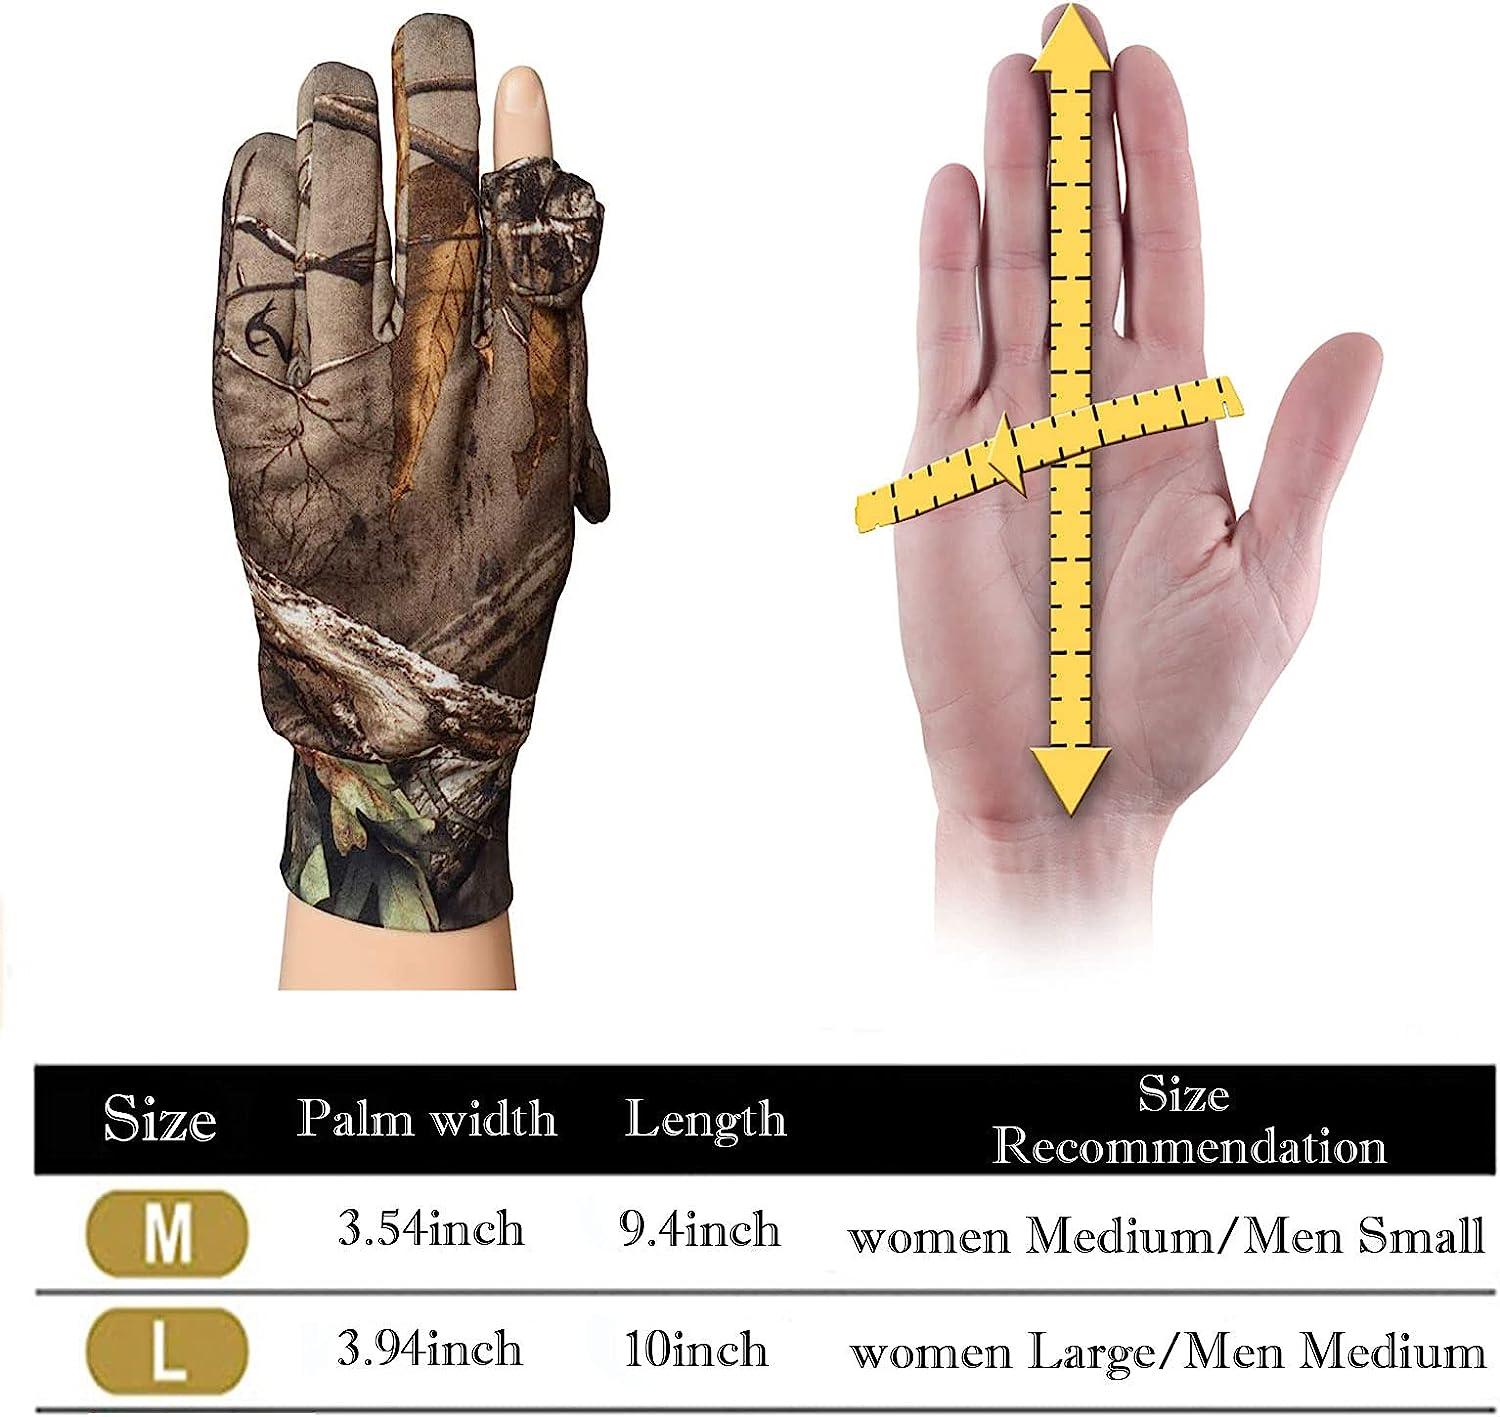  Favuit Camo Hunting Gloves, Lightweight Anti-Slip Full Finger  Fingerless Glove Outdoor Camouflage Gear Archery Accessories for Hunting  Turkey Fishing Airsoft (Black L) : Sports & Outdoors